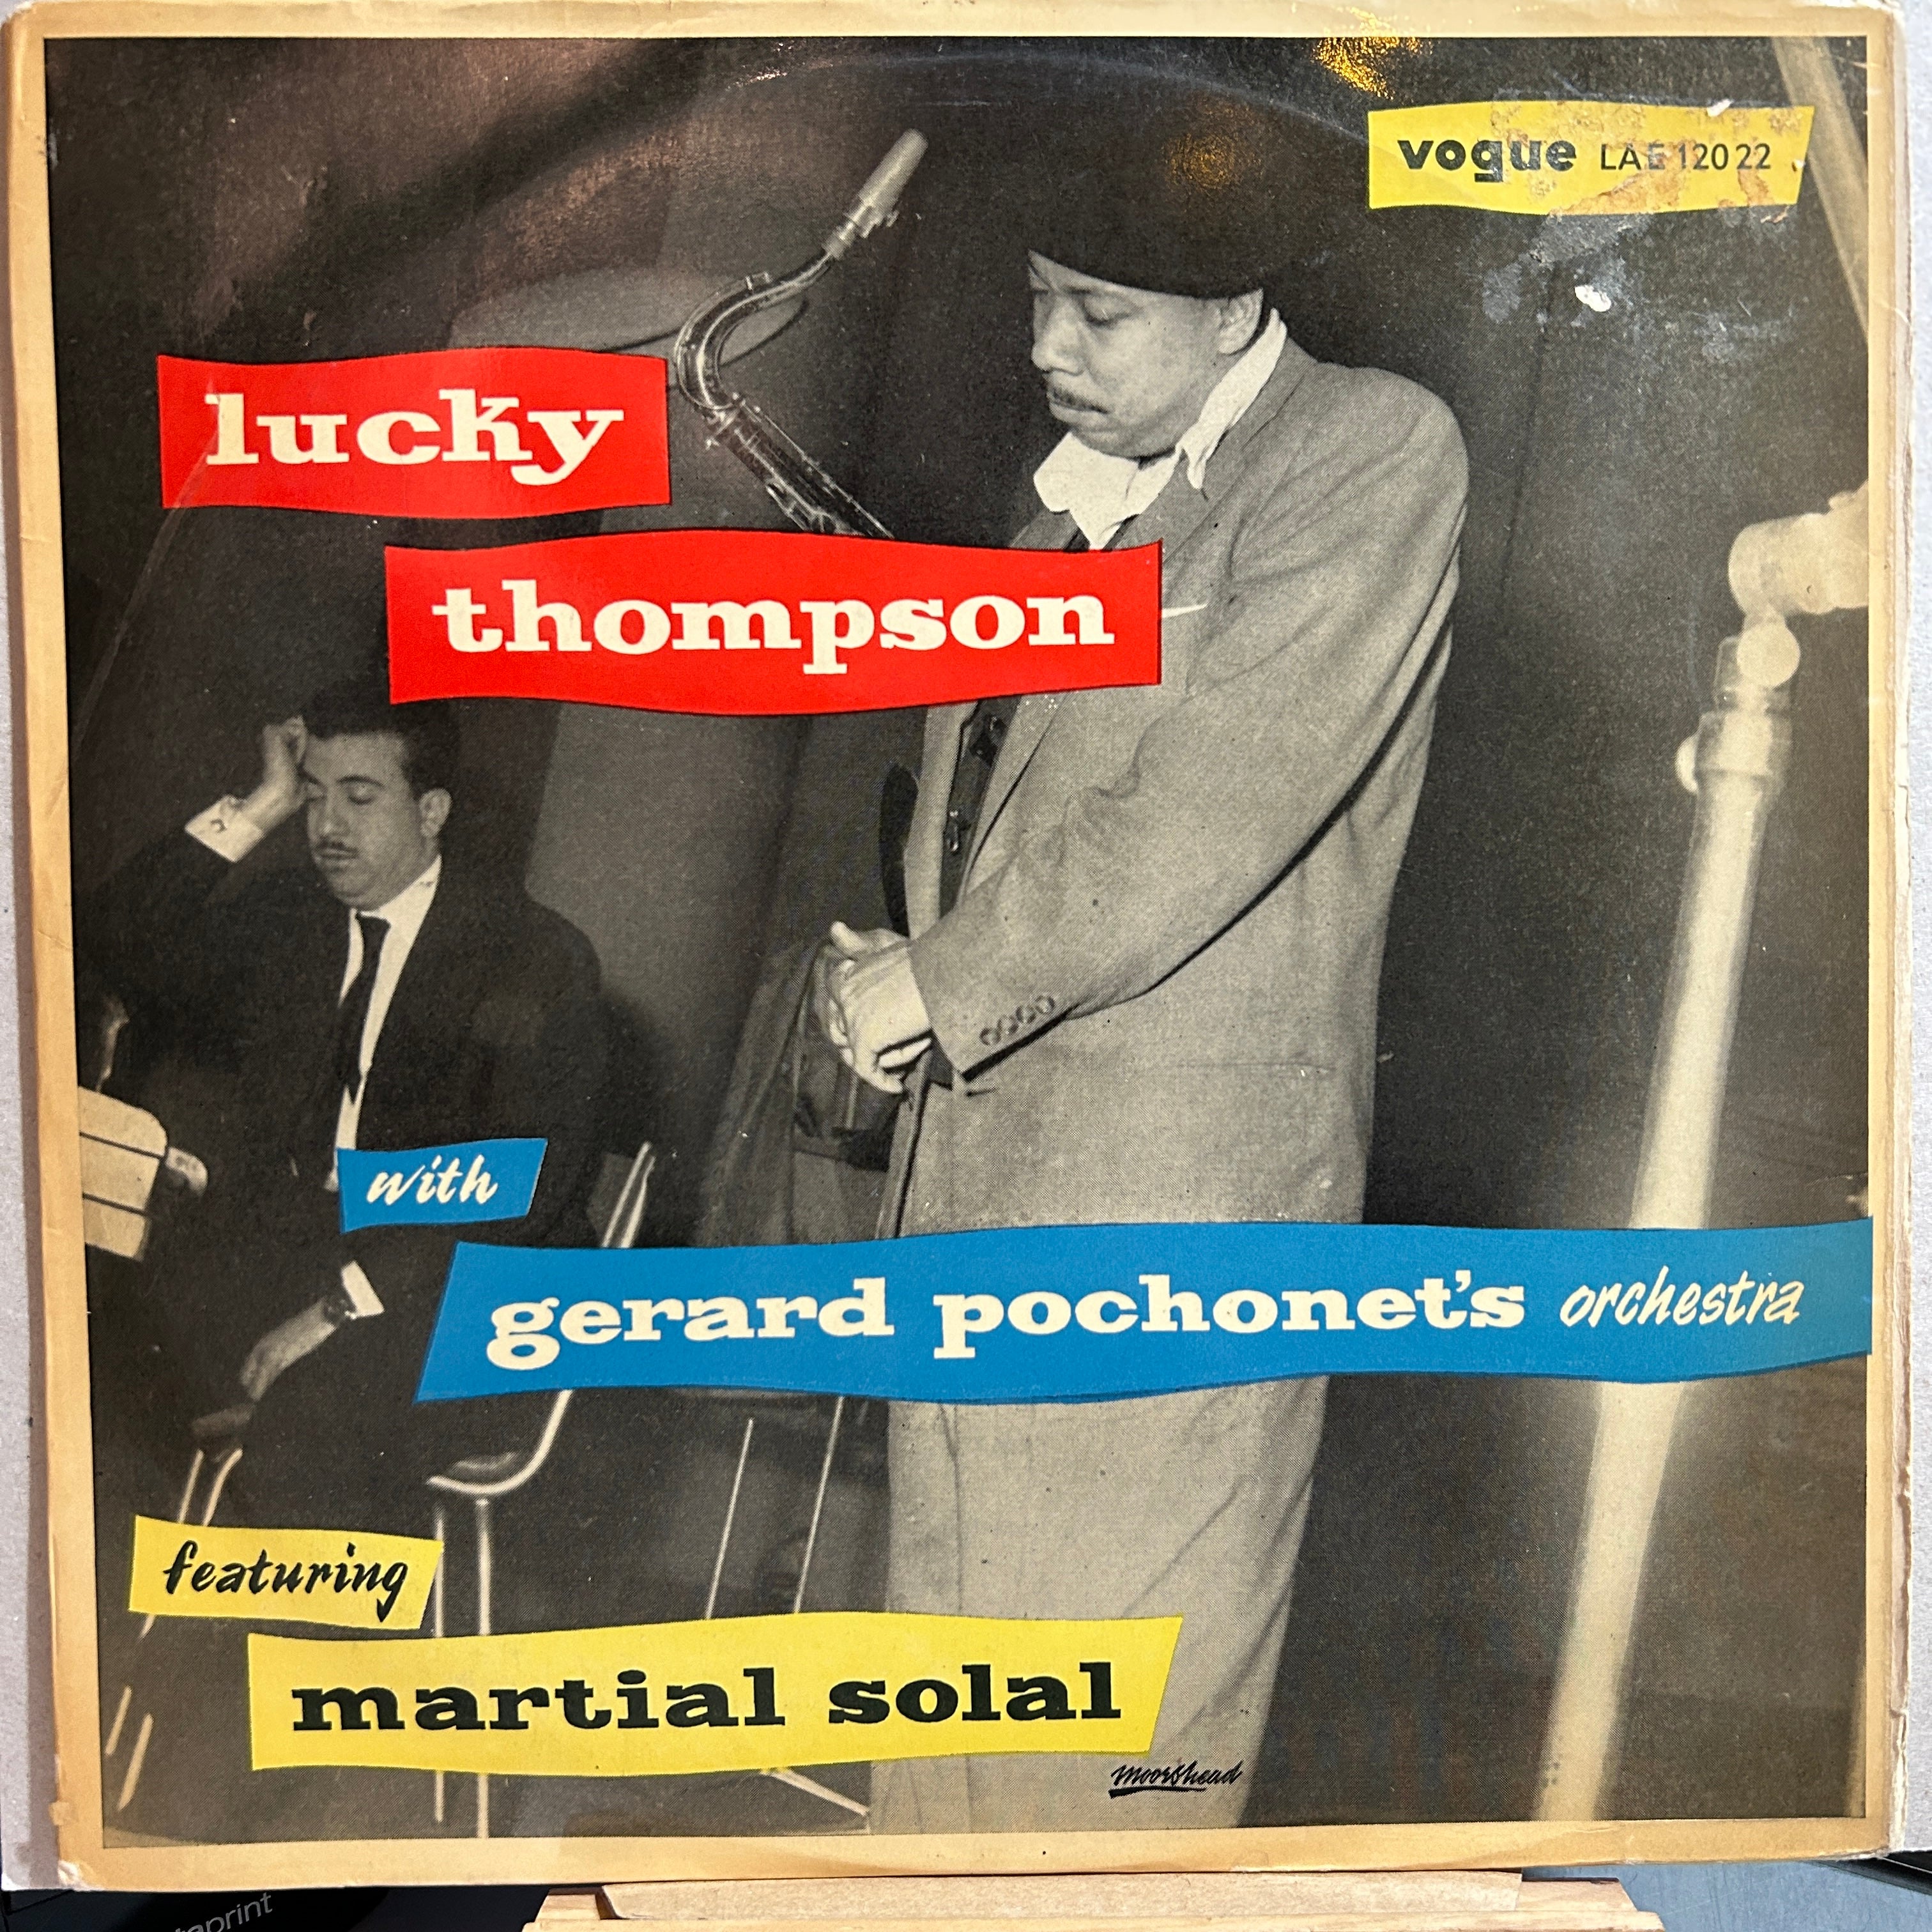 Lucky Thompson With Gerard Pochonet's Orchestra